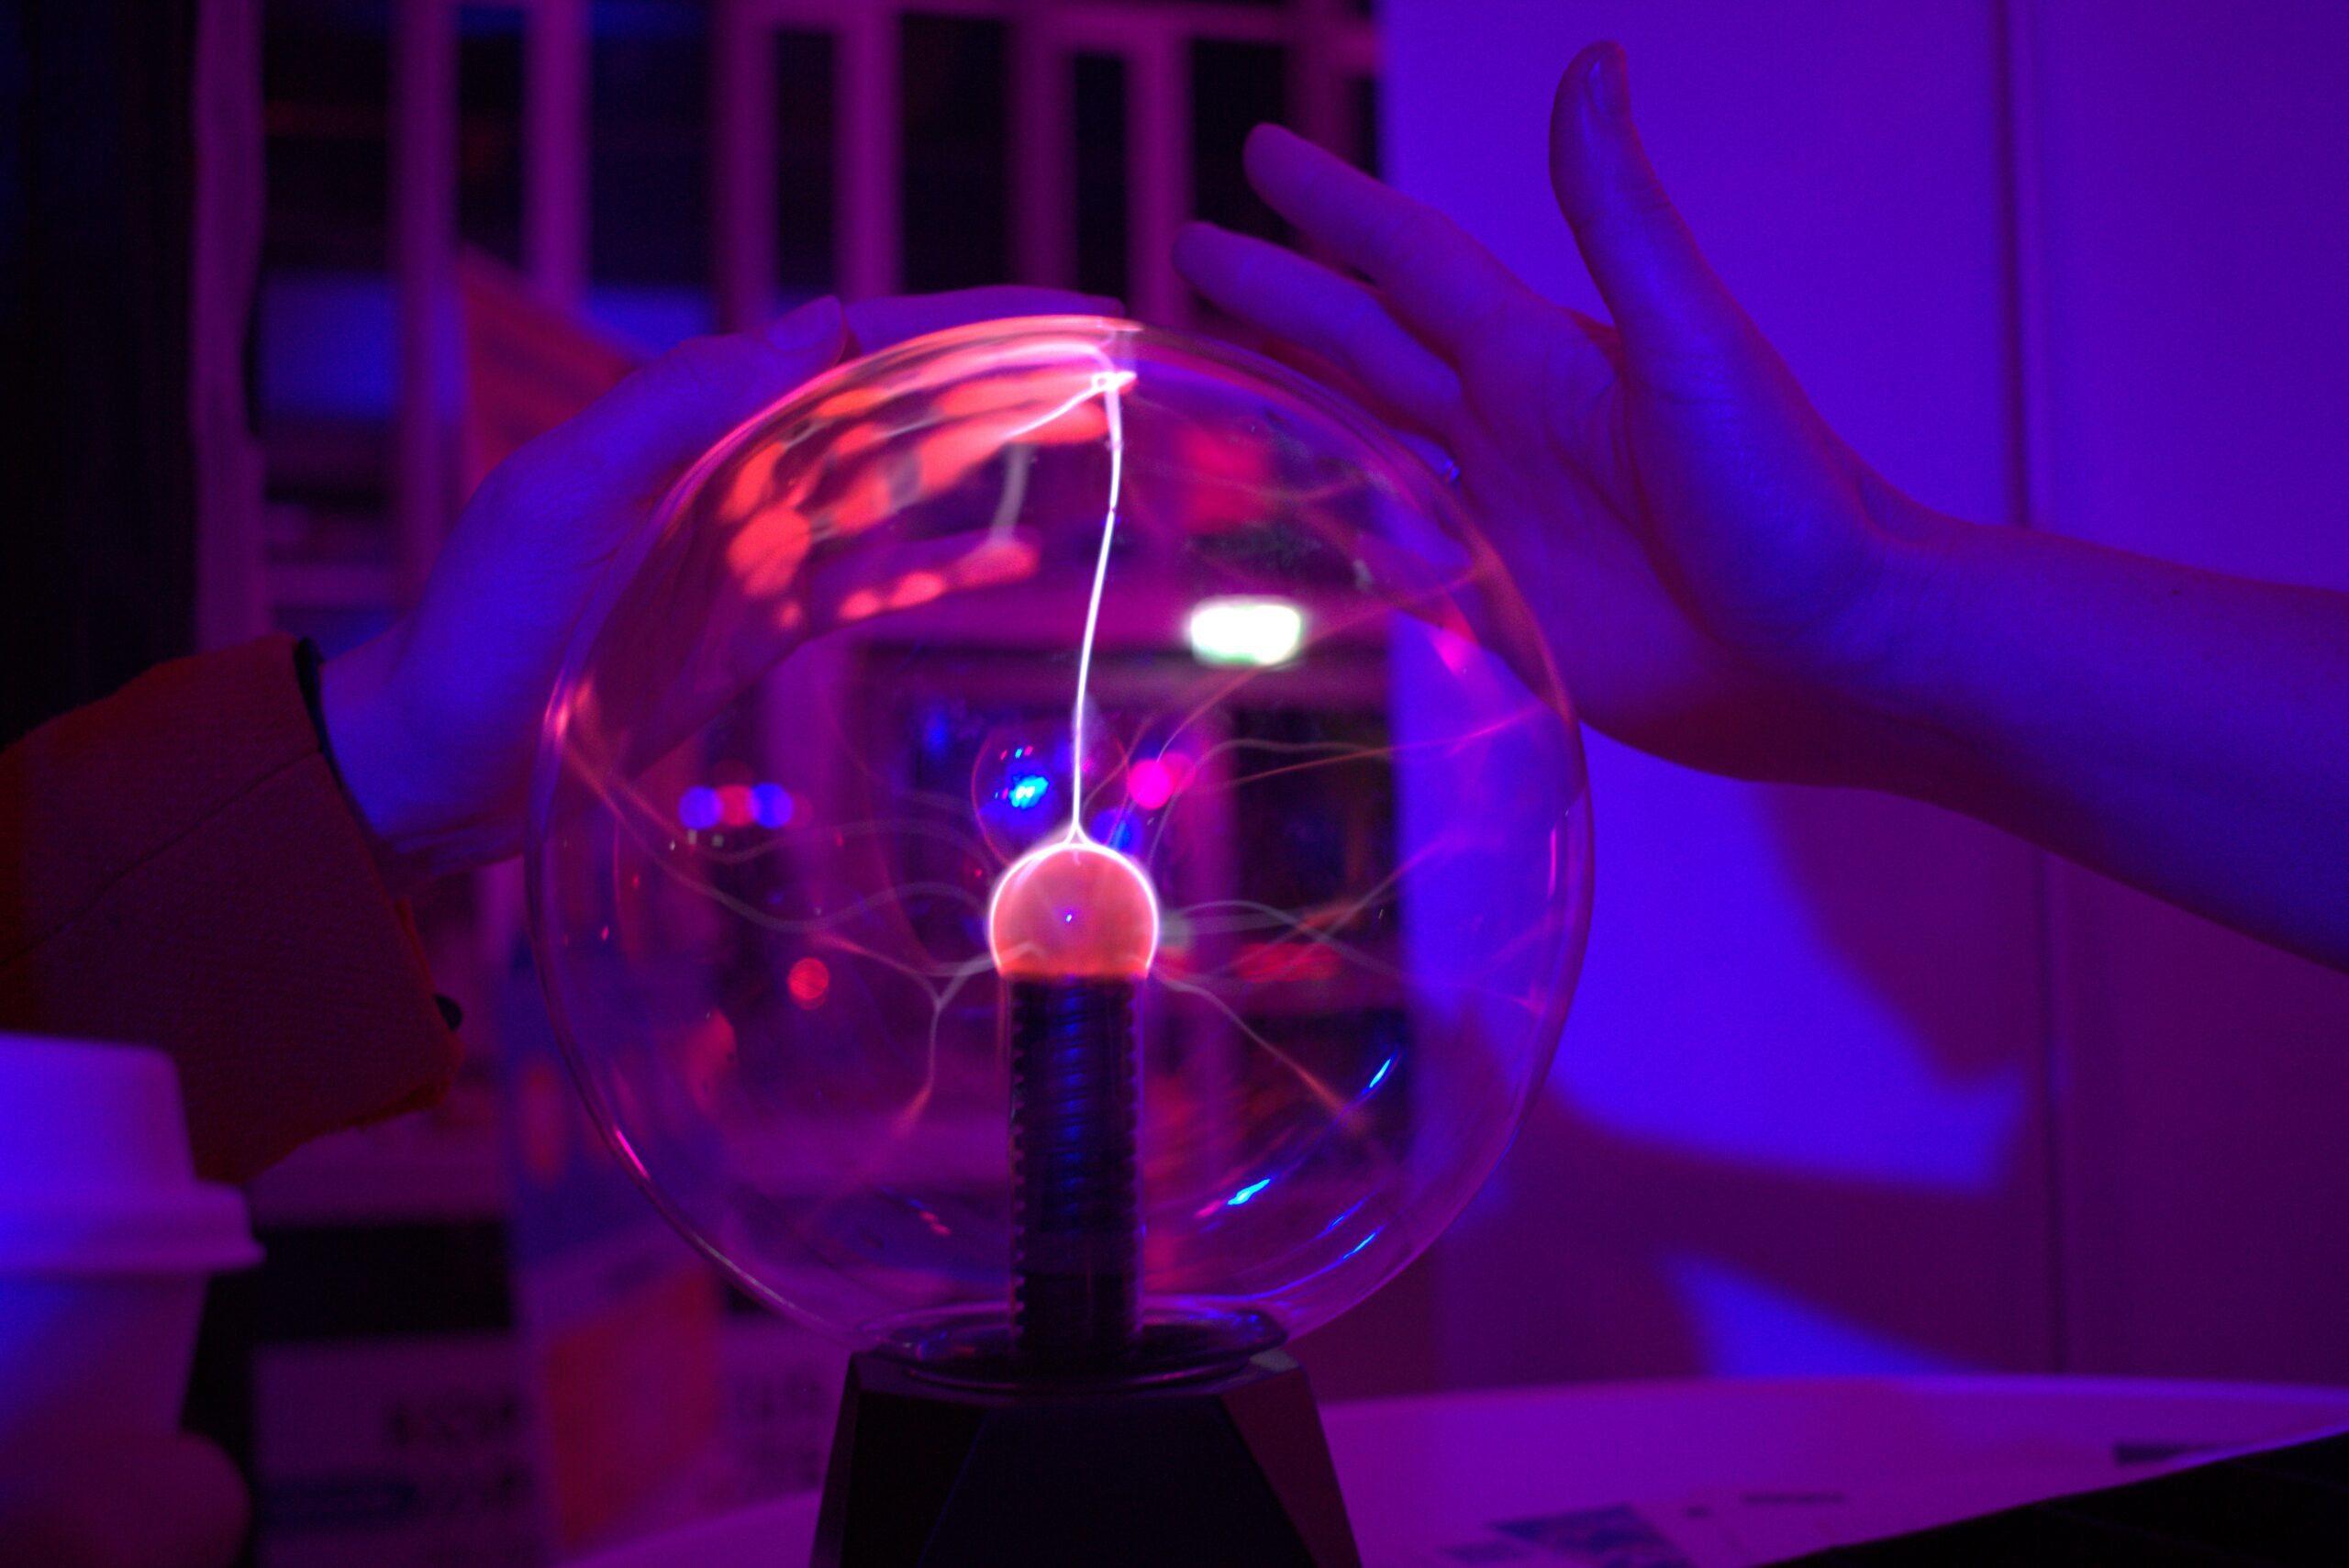 A child's hand touches a plasma ball and makes it glow, while a second hand is about to touch the ball.